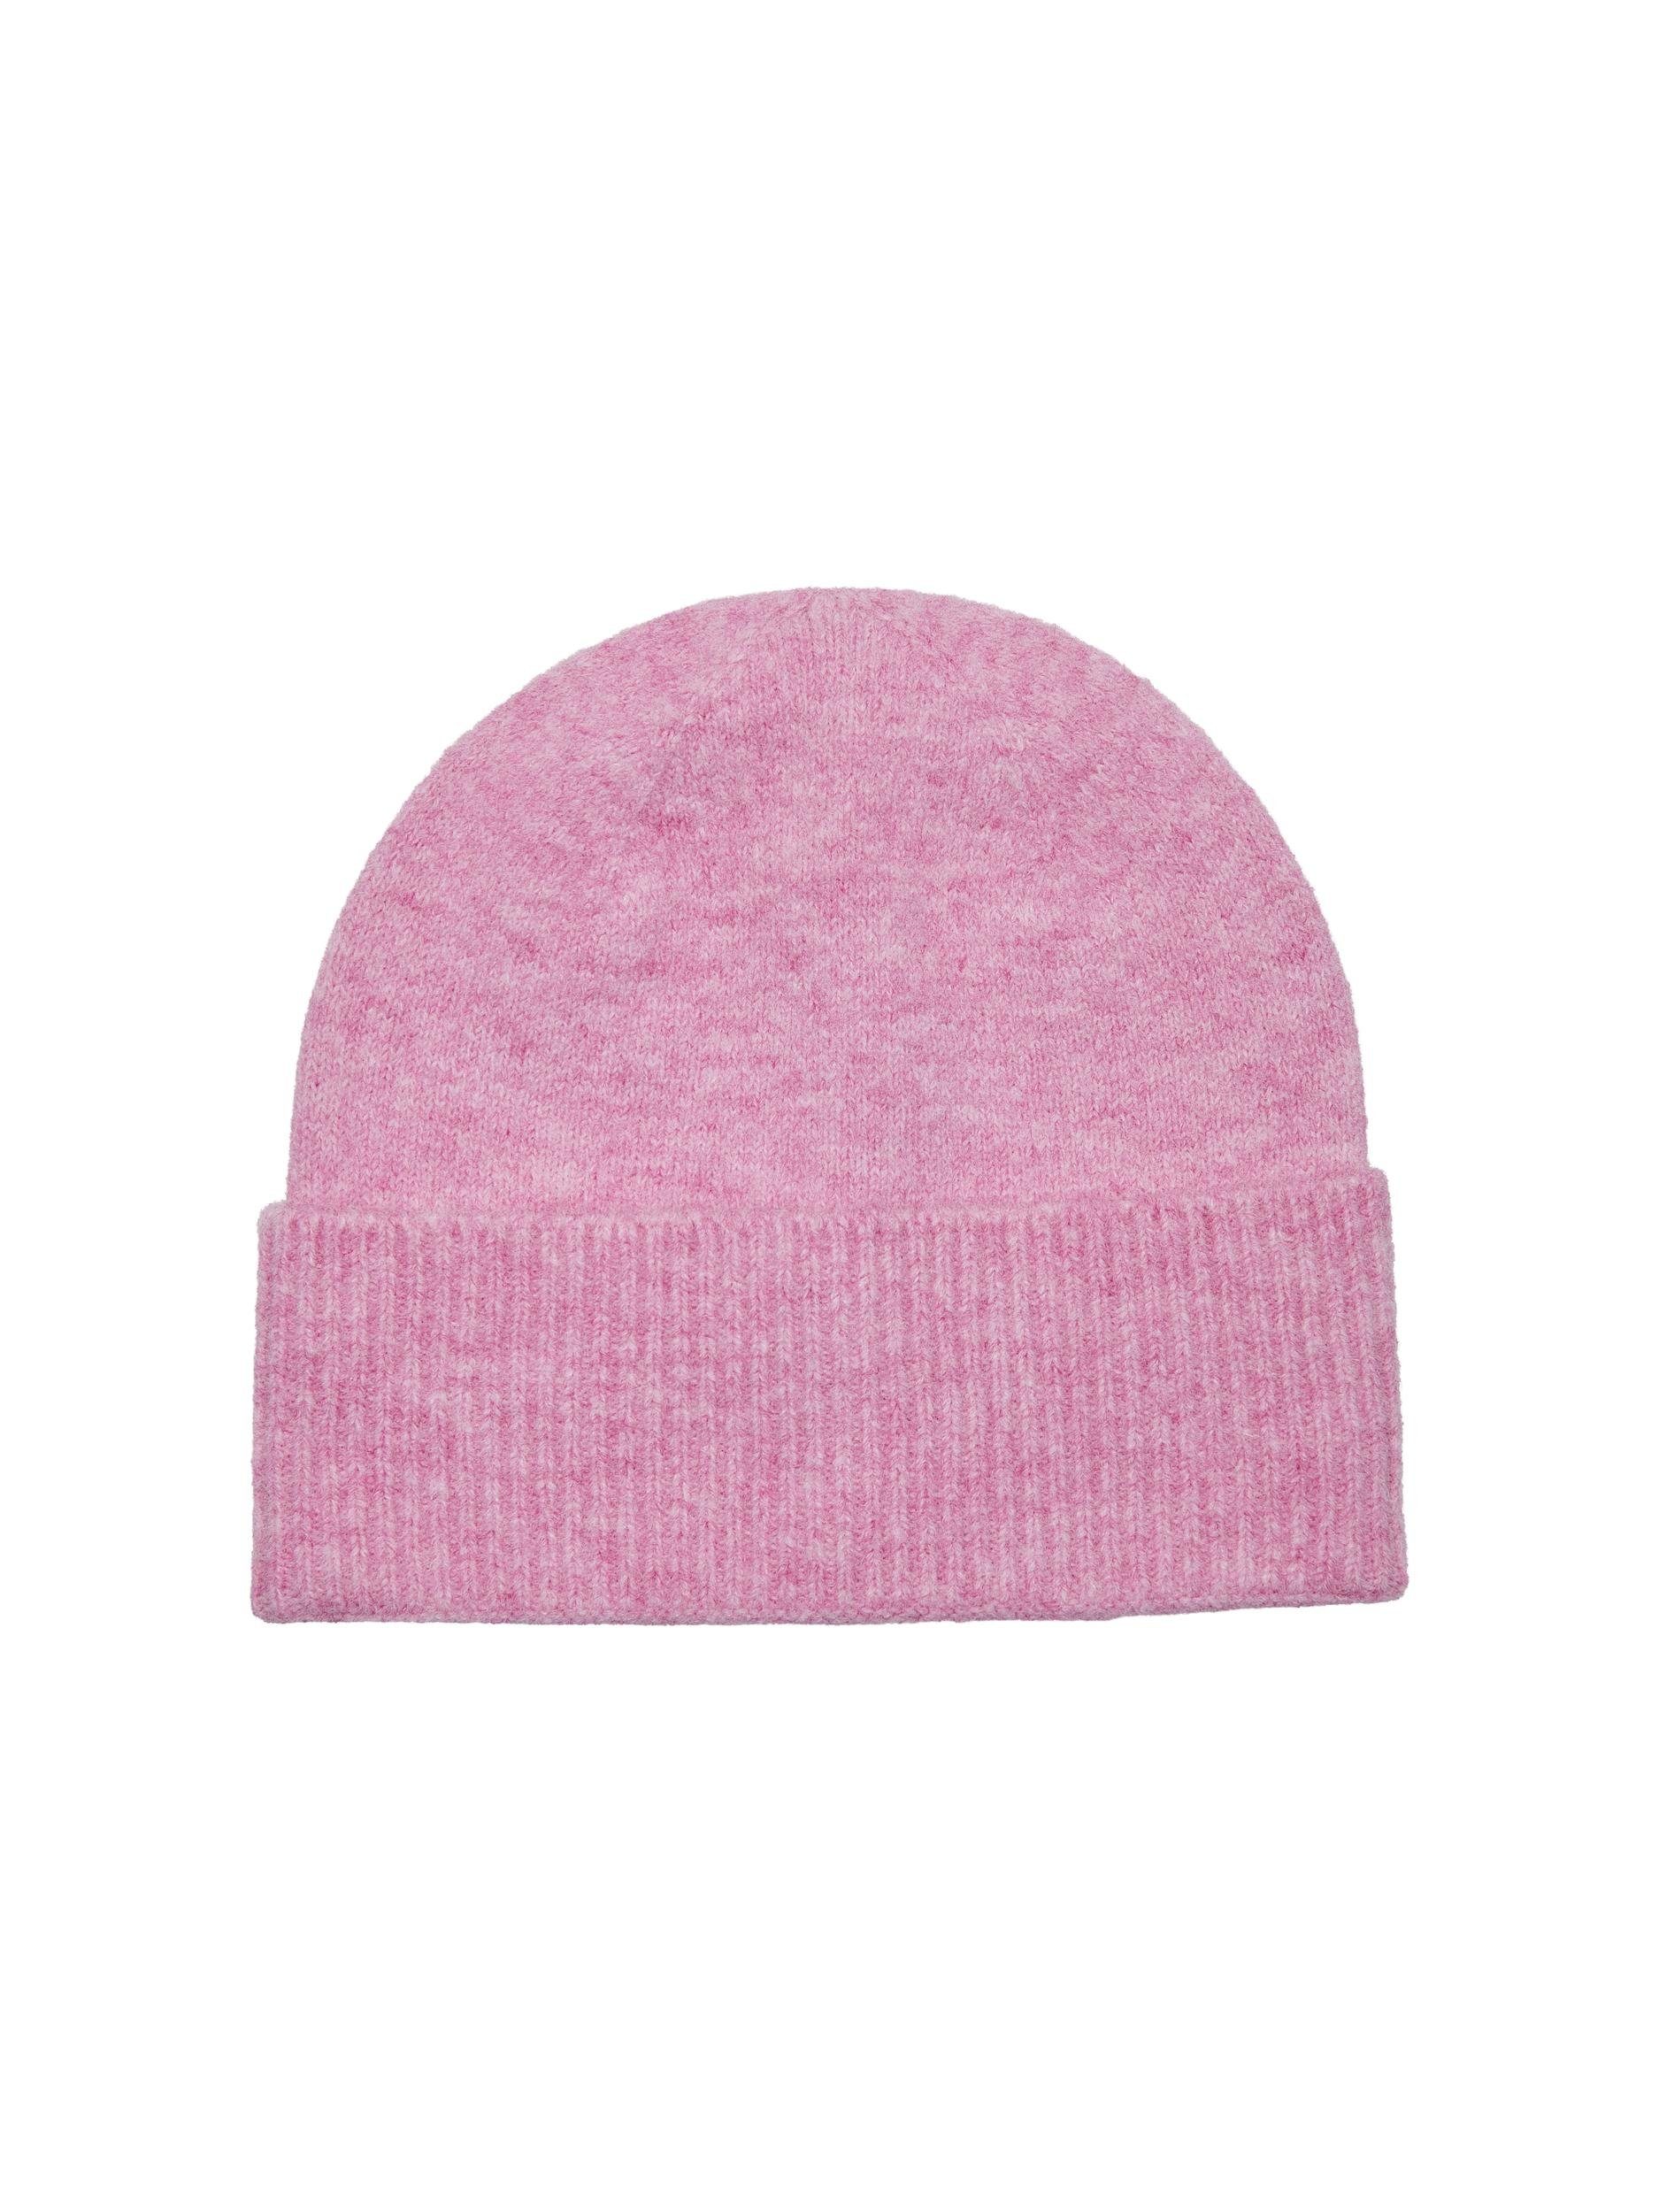 LIFE ONLEVA CC Pink BEANIE Lady KNIT ONLY Beanie